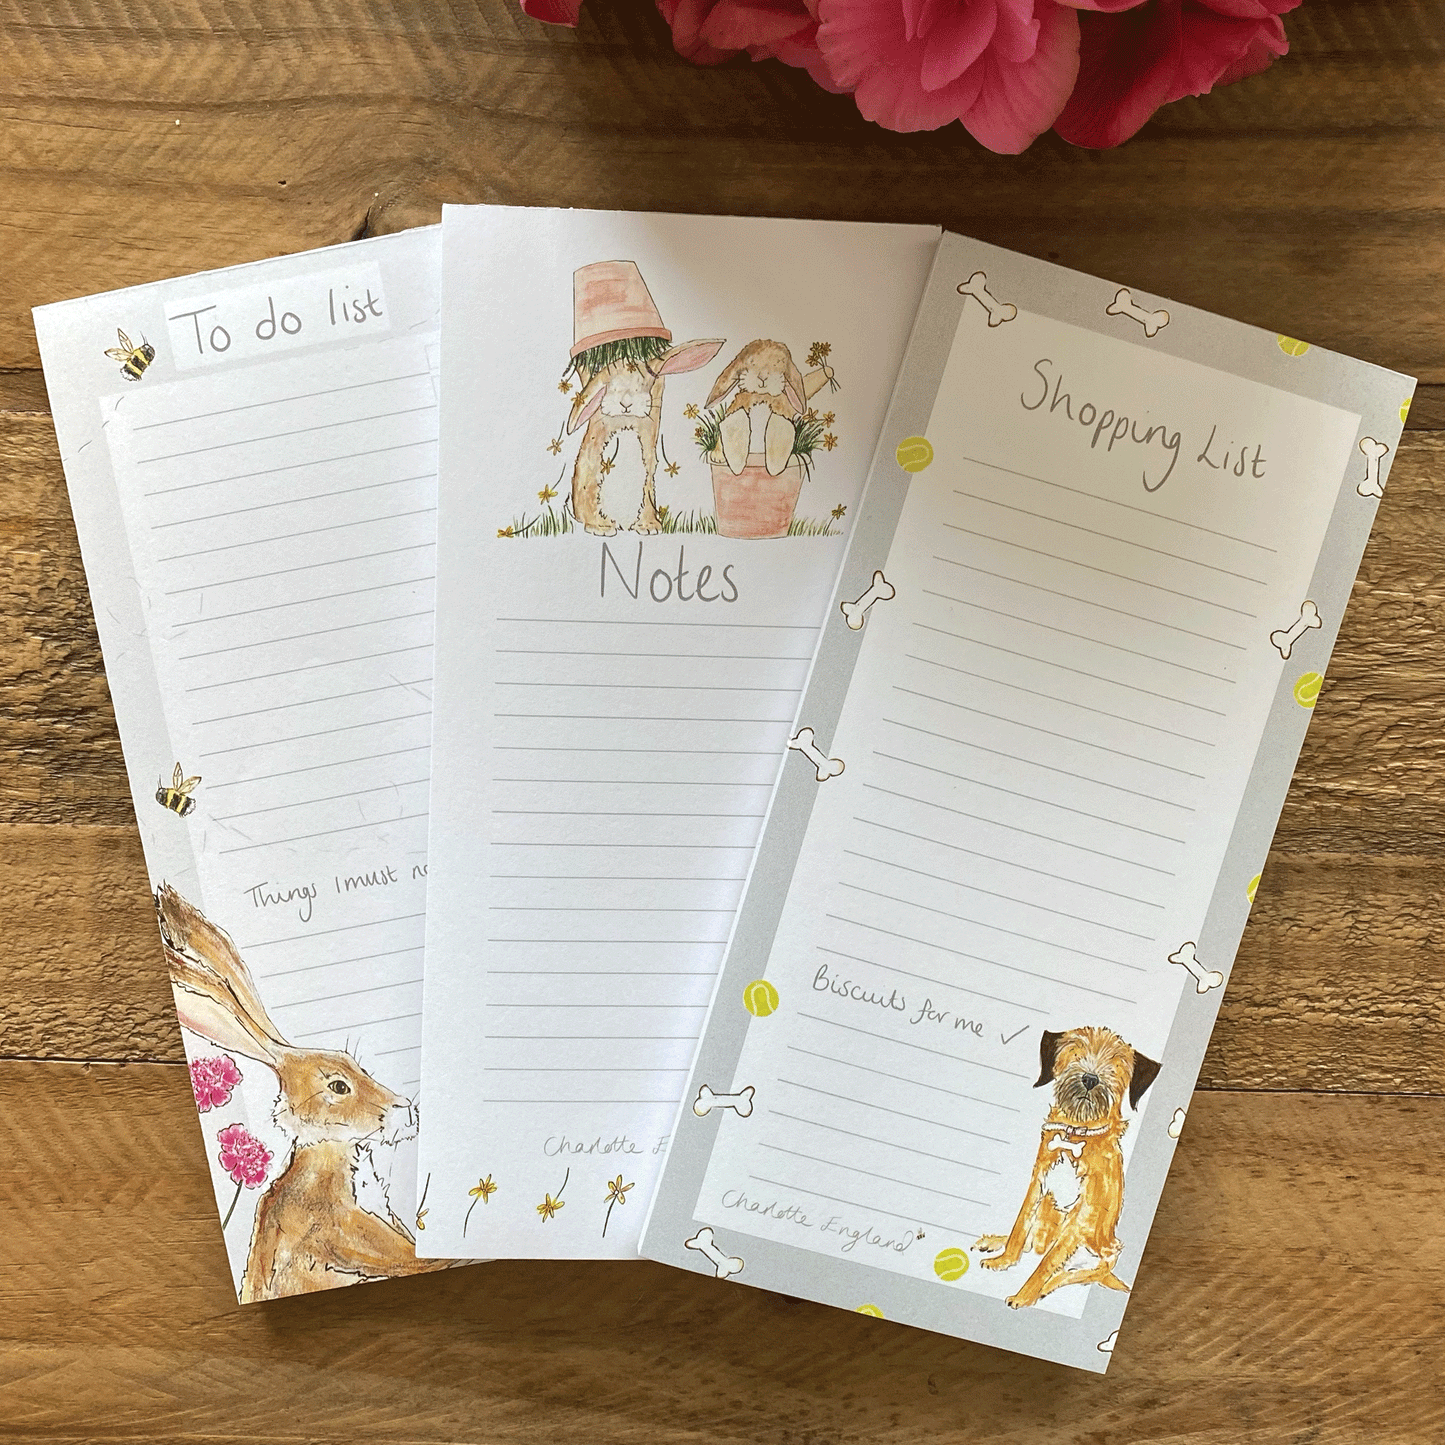 Border Terrier Shopping List Note Pad